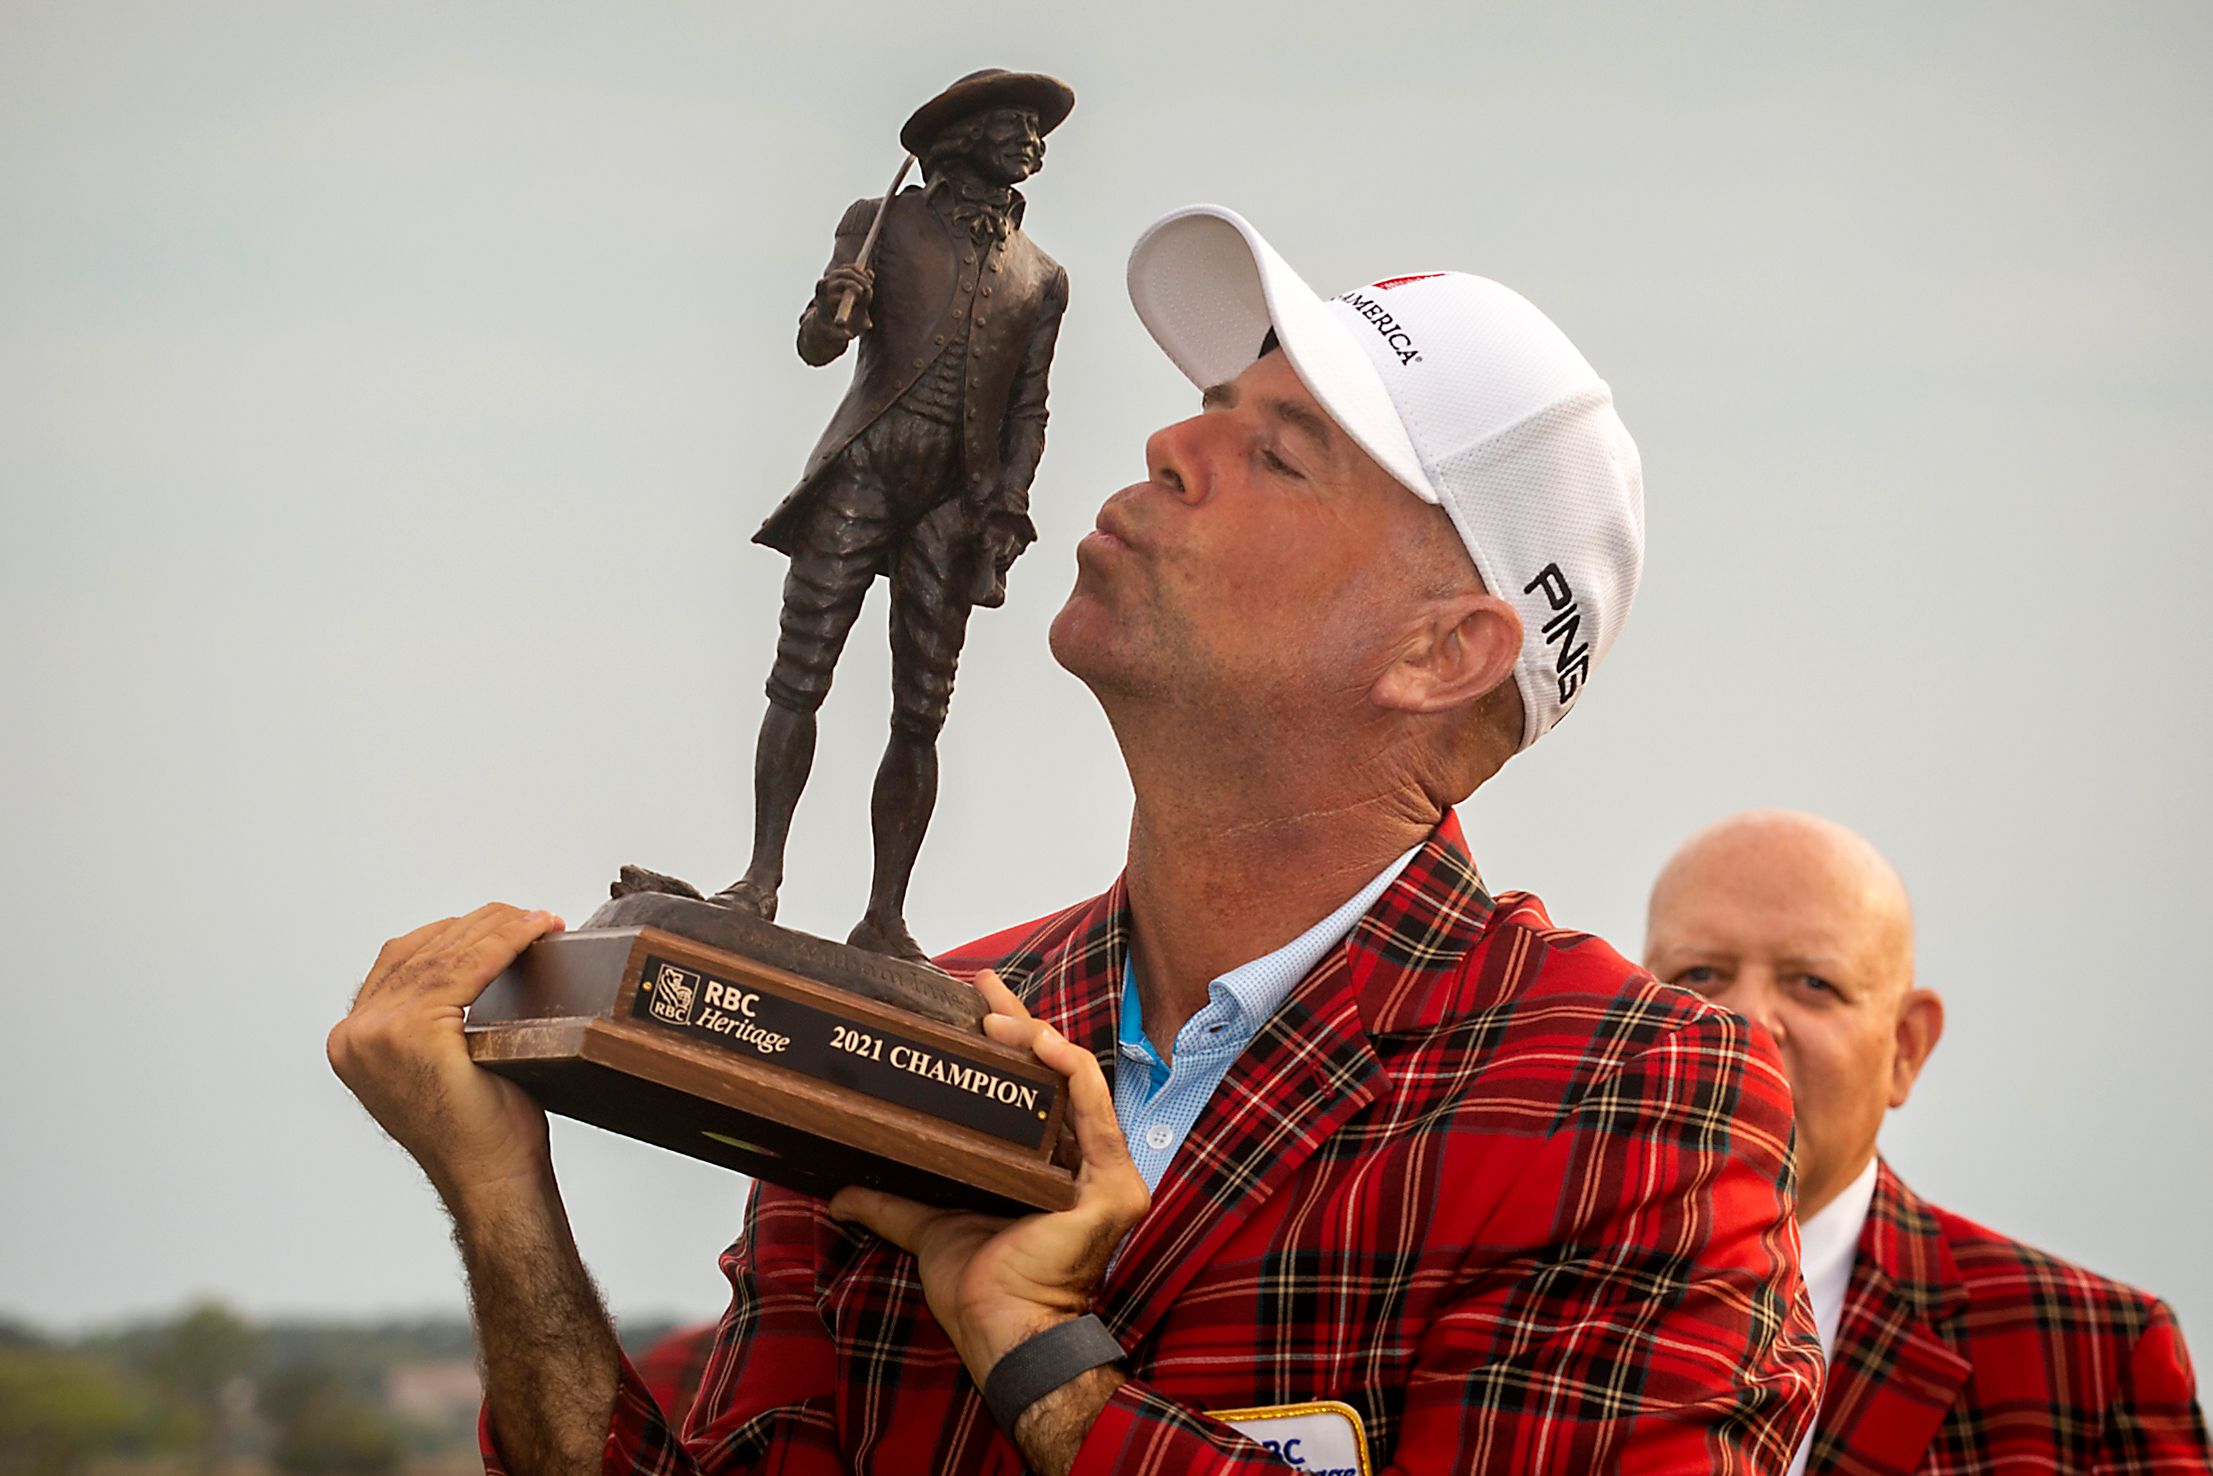 Cink-cess! 47-year-old Cink wins 3rd RBC Heritage title The Seattle Times